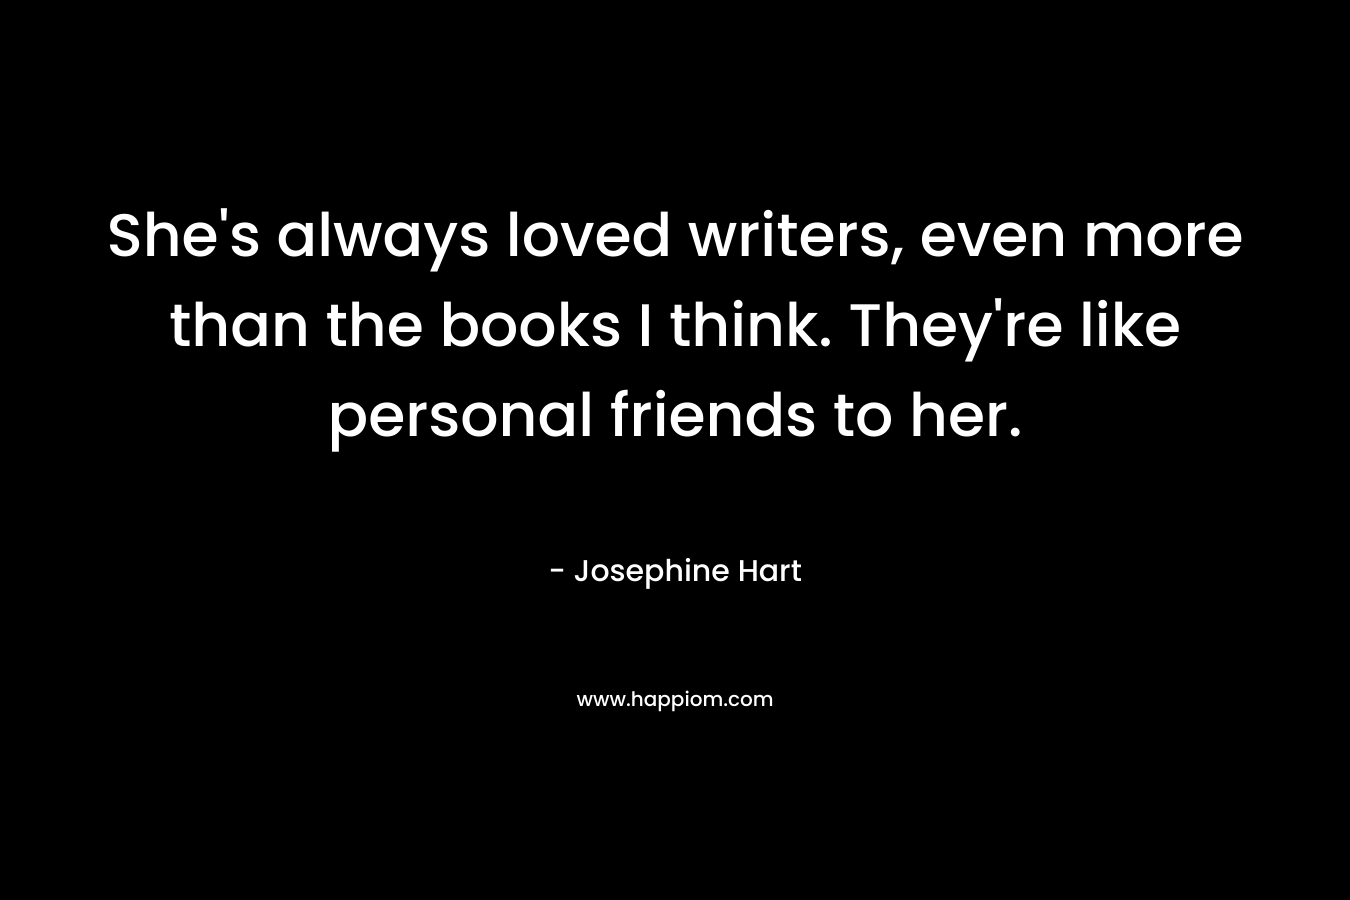 She's always loved writers, even more than the books I think. They're like personal friends to her.